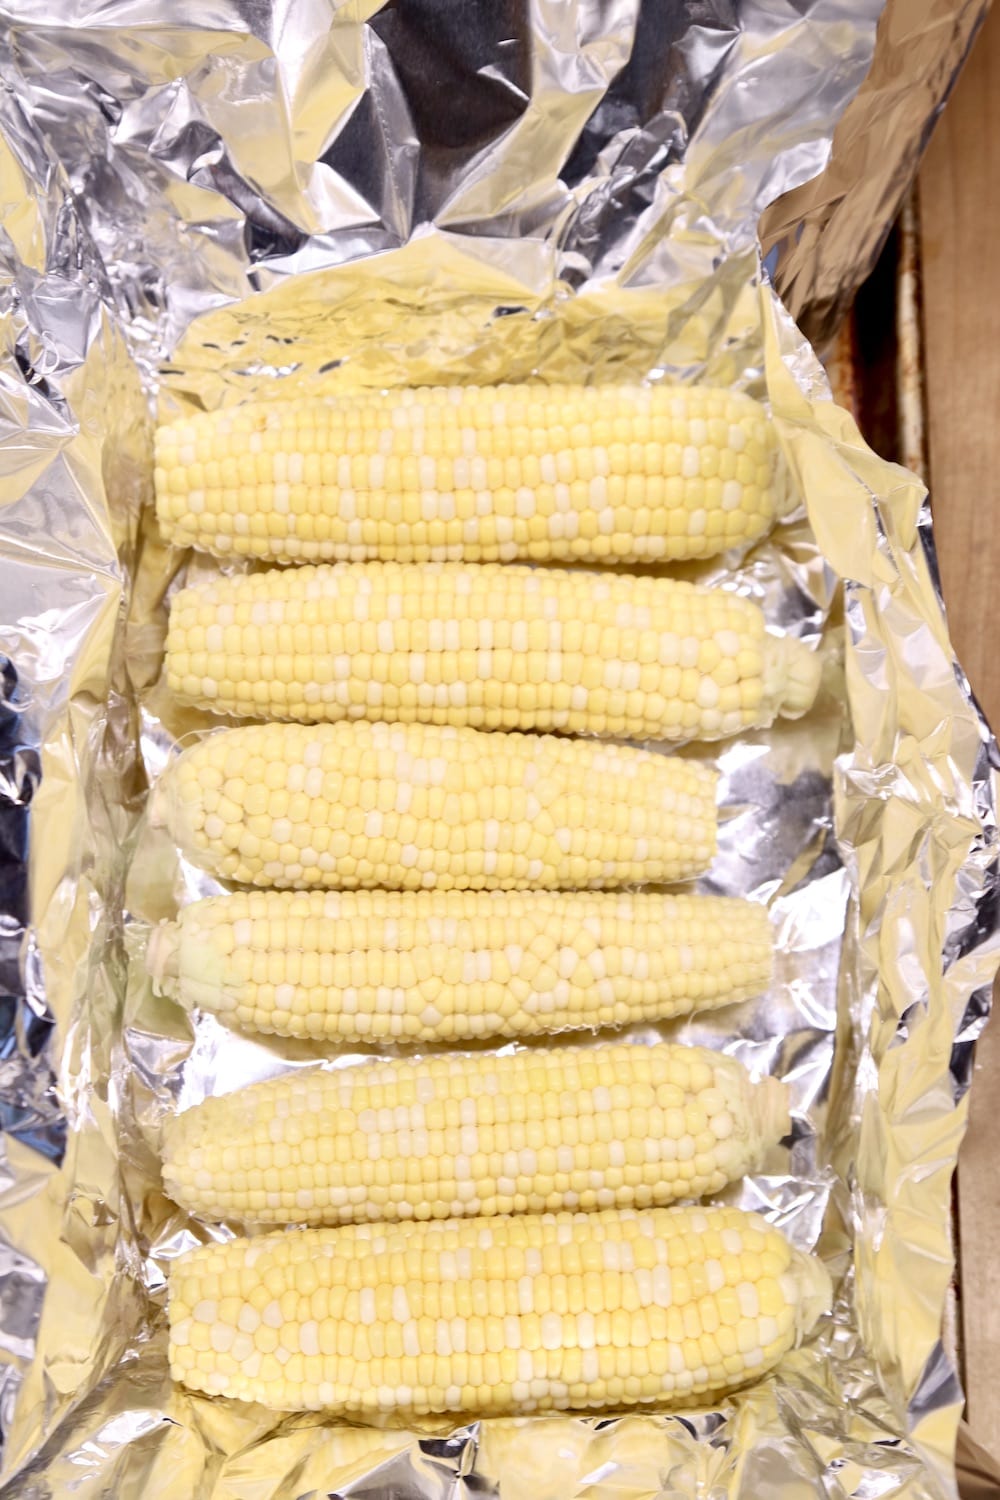 6 ears of husked corn on the cob, on foil lined pan